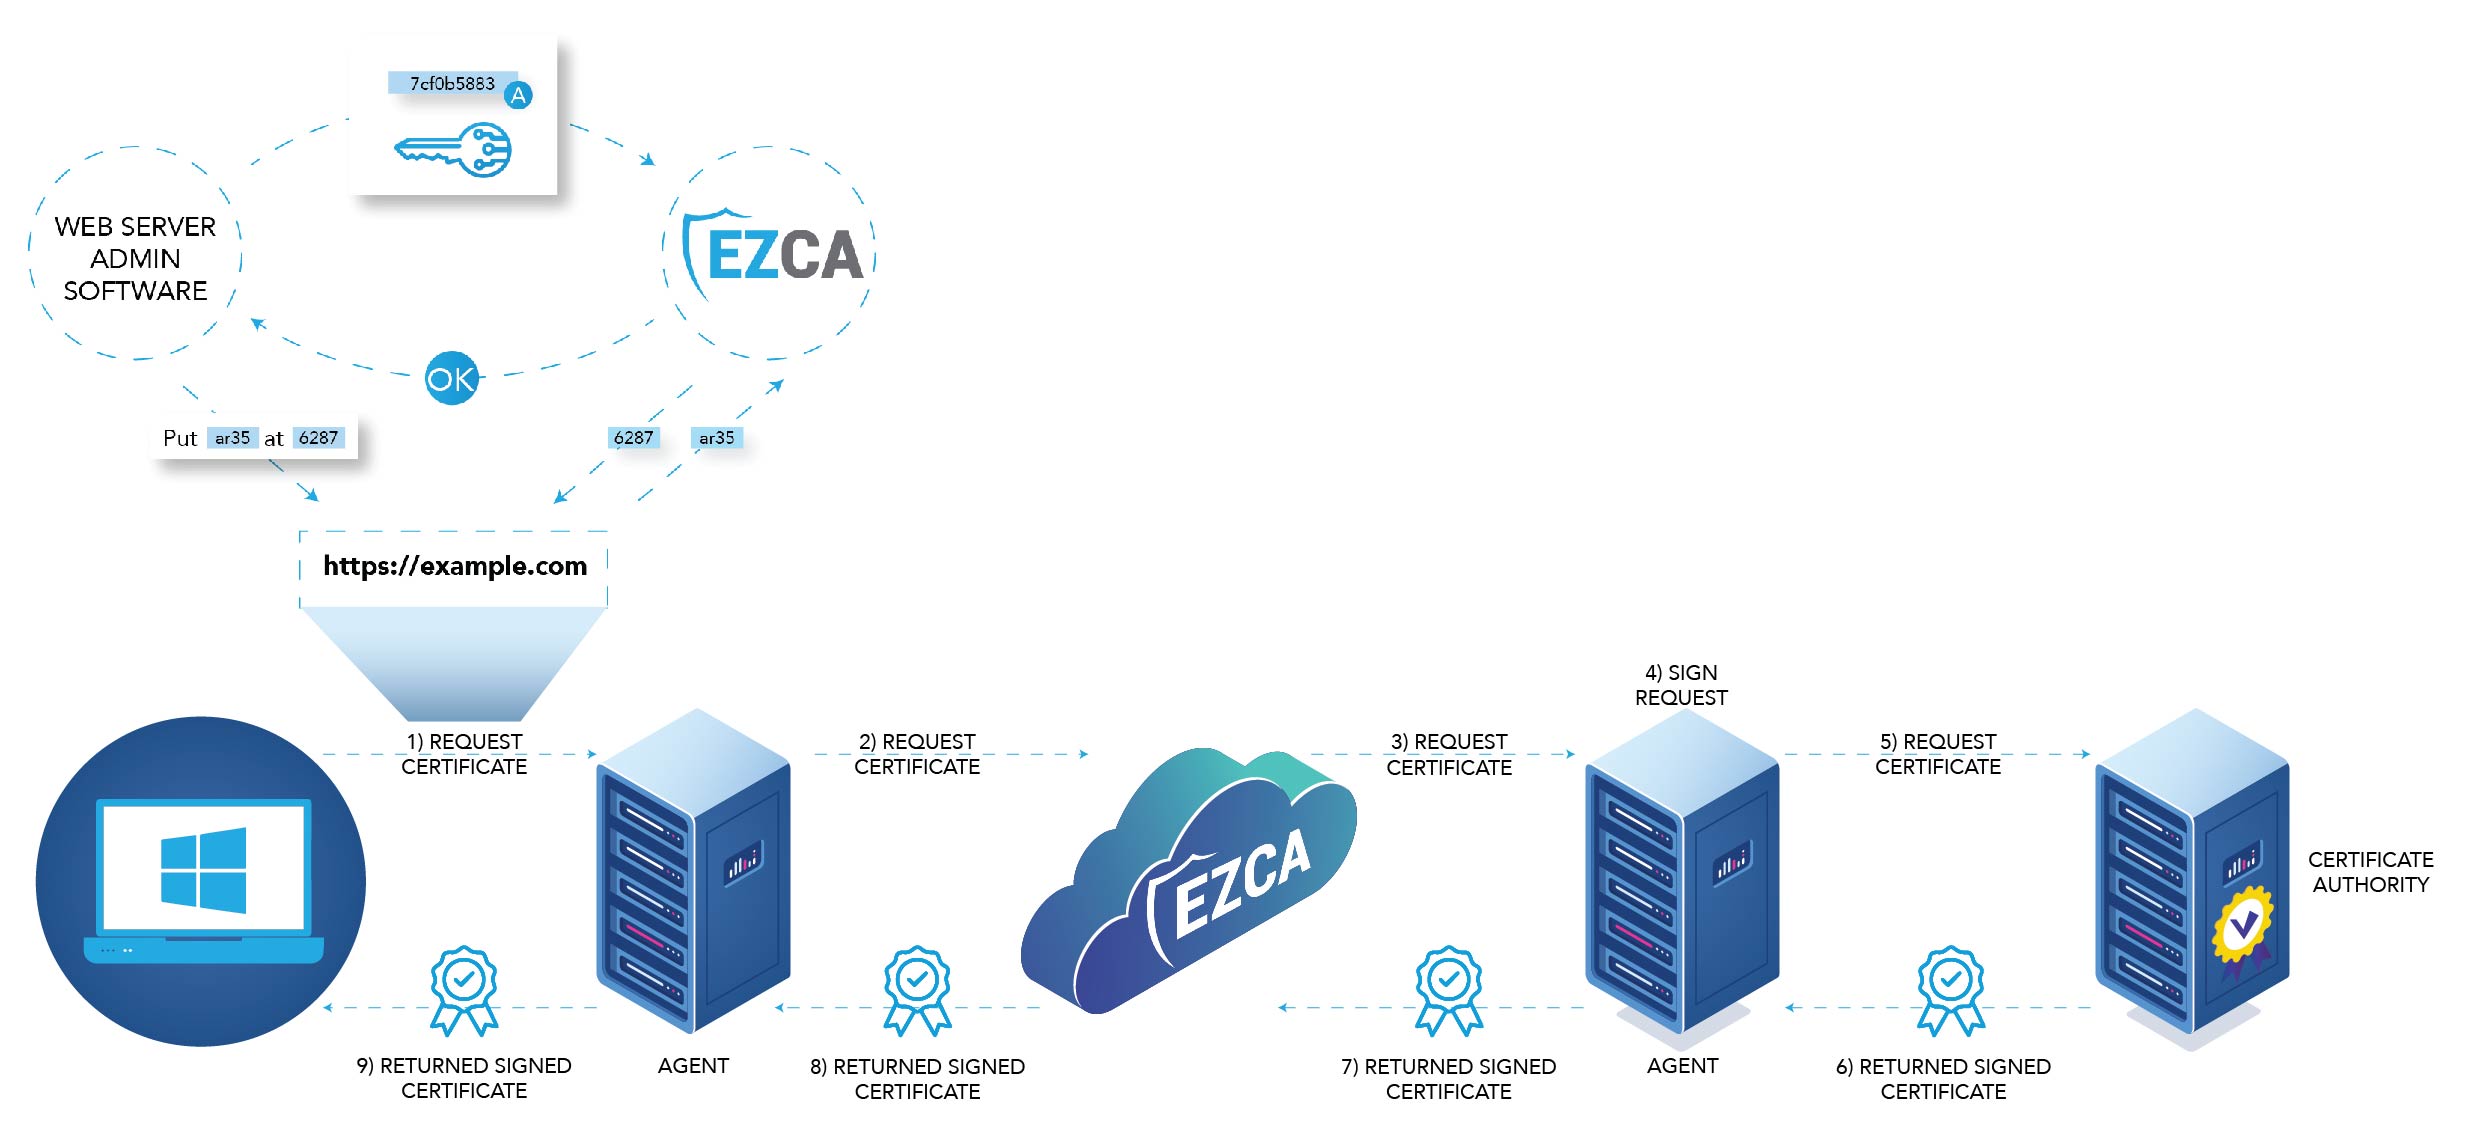 How ACME works with EZCA and ADCS